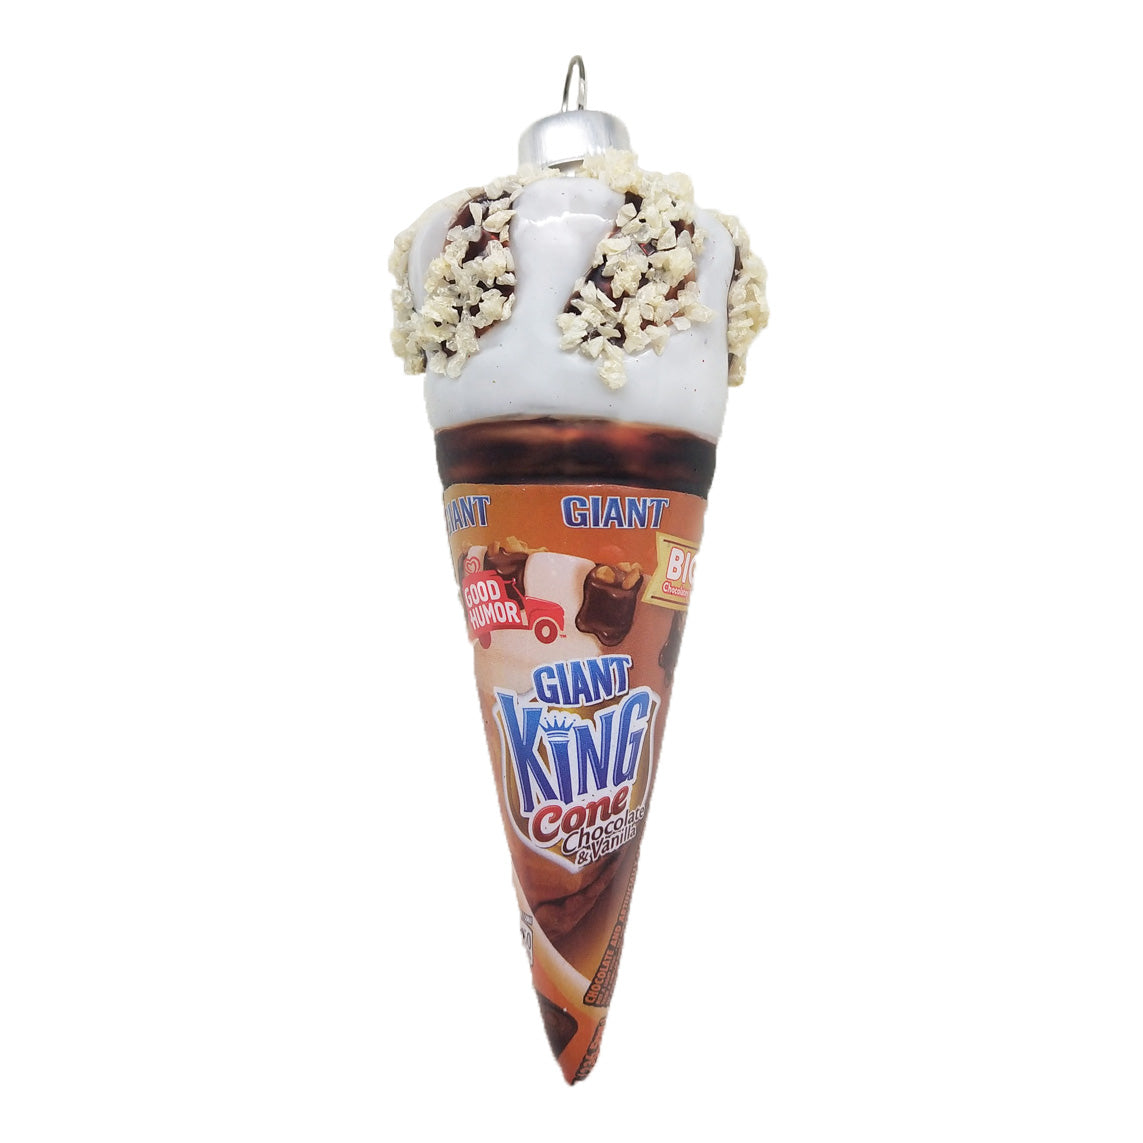 It's never too cold for ice cream, and there's nothing quite like a Giant King Cone™ to satisfy your cravings. This ornament captures every delicious, chocolatey, nutty detail.